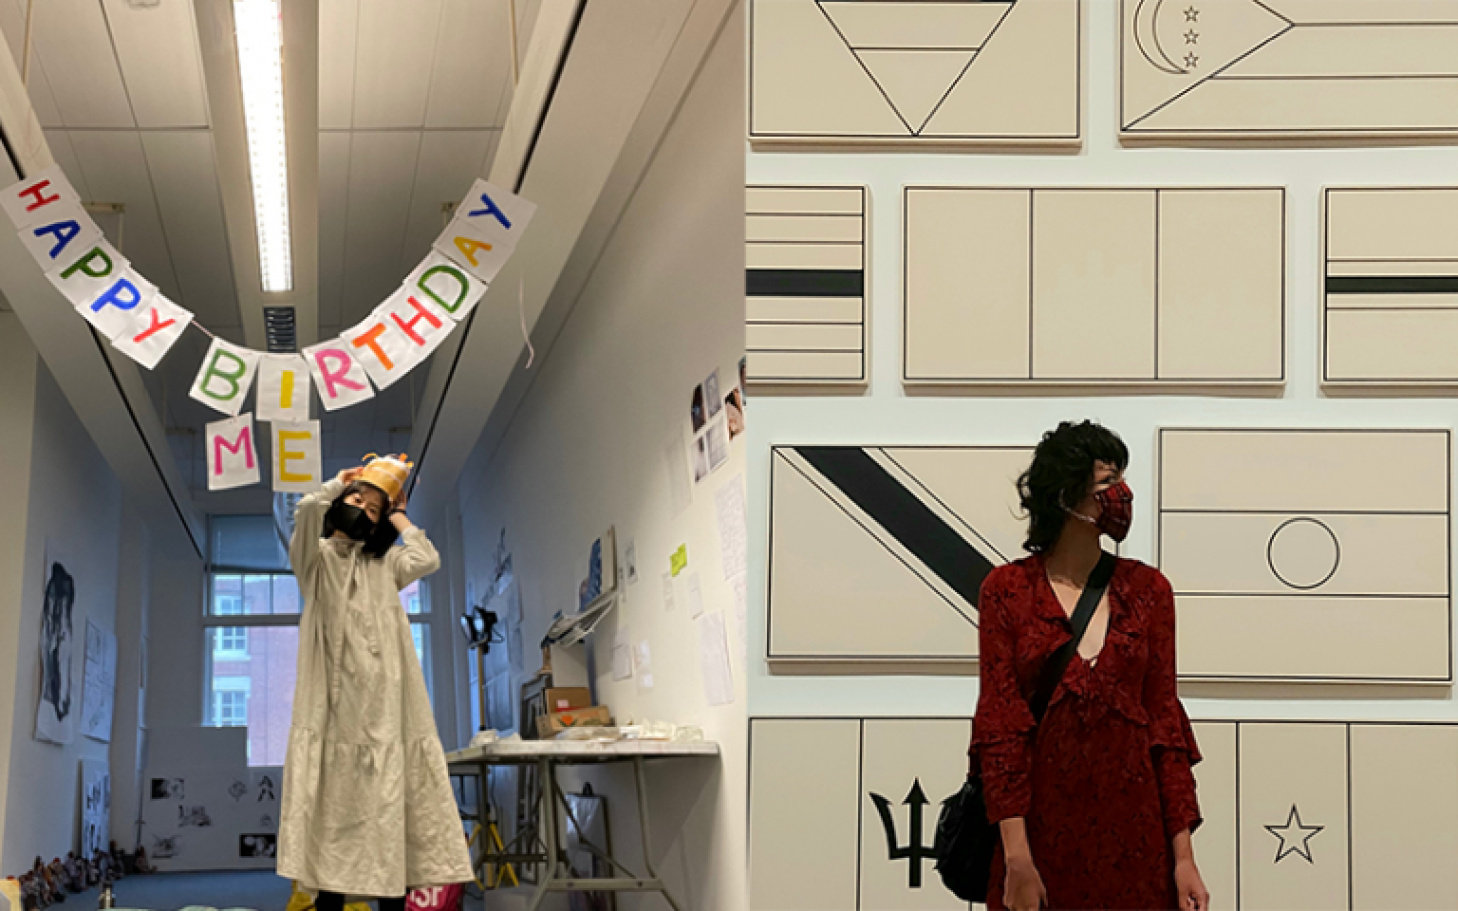 UCL East Artists-in-Residence 2022, Annie Lee and Olivia Lopez